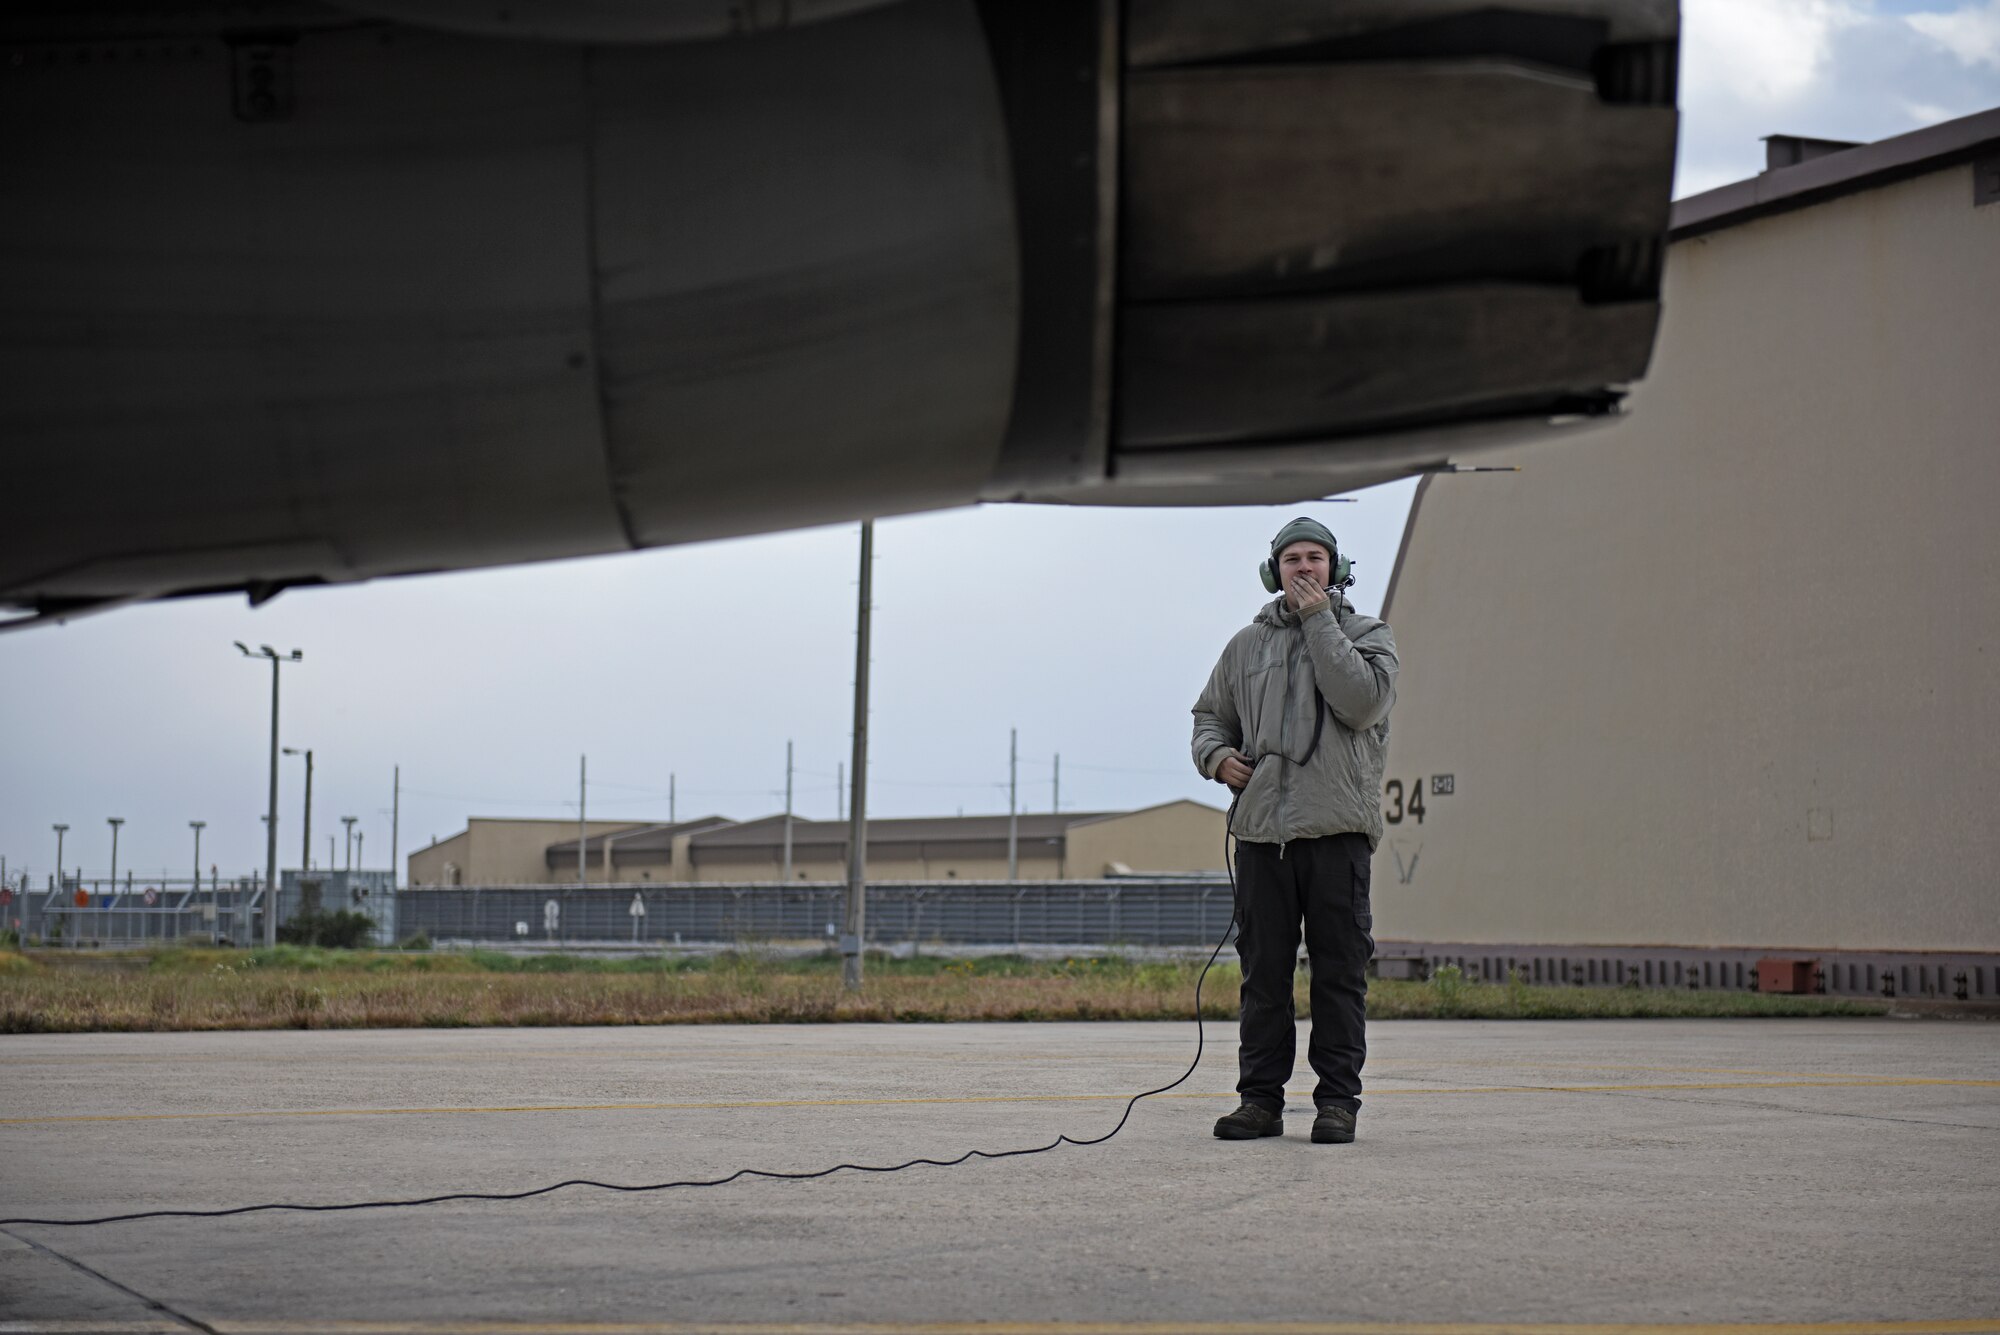 A U.S. Air Force maintainer assigned to the 35th Aircraft Maintenance Unit conducts a pre-flight inspection at Kunsan Air Base, Republic of Korea, Nov. 19, 2019. The 8th Maintenance Group is responsible for daily flying and maintenance operations, intermediate level aircraft maintenance, component repair and maintenance training for the wing's assigned aircraft. (U.S. Air Force photo by Staff Sgt. Mackenzie Mendez)